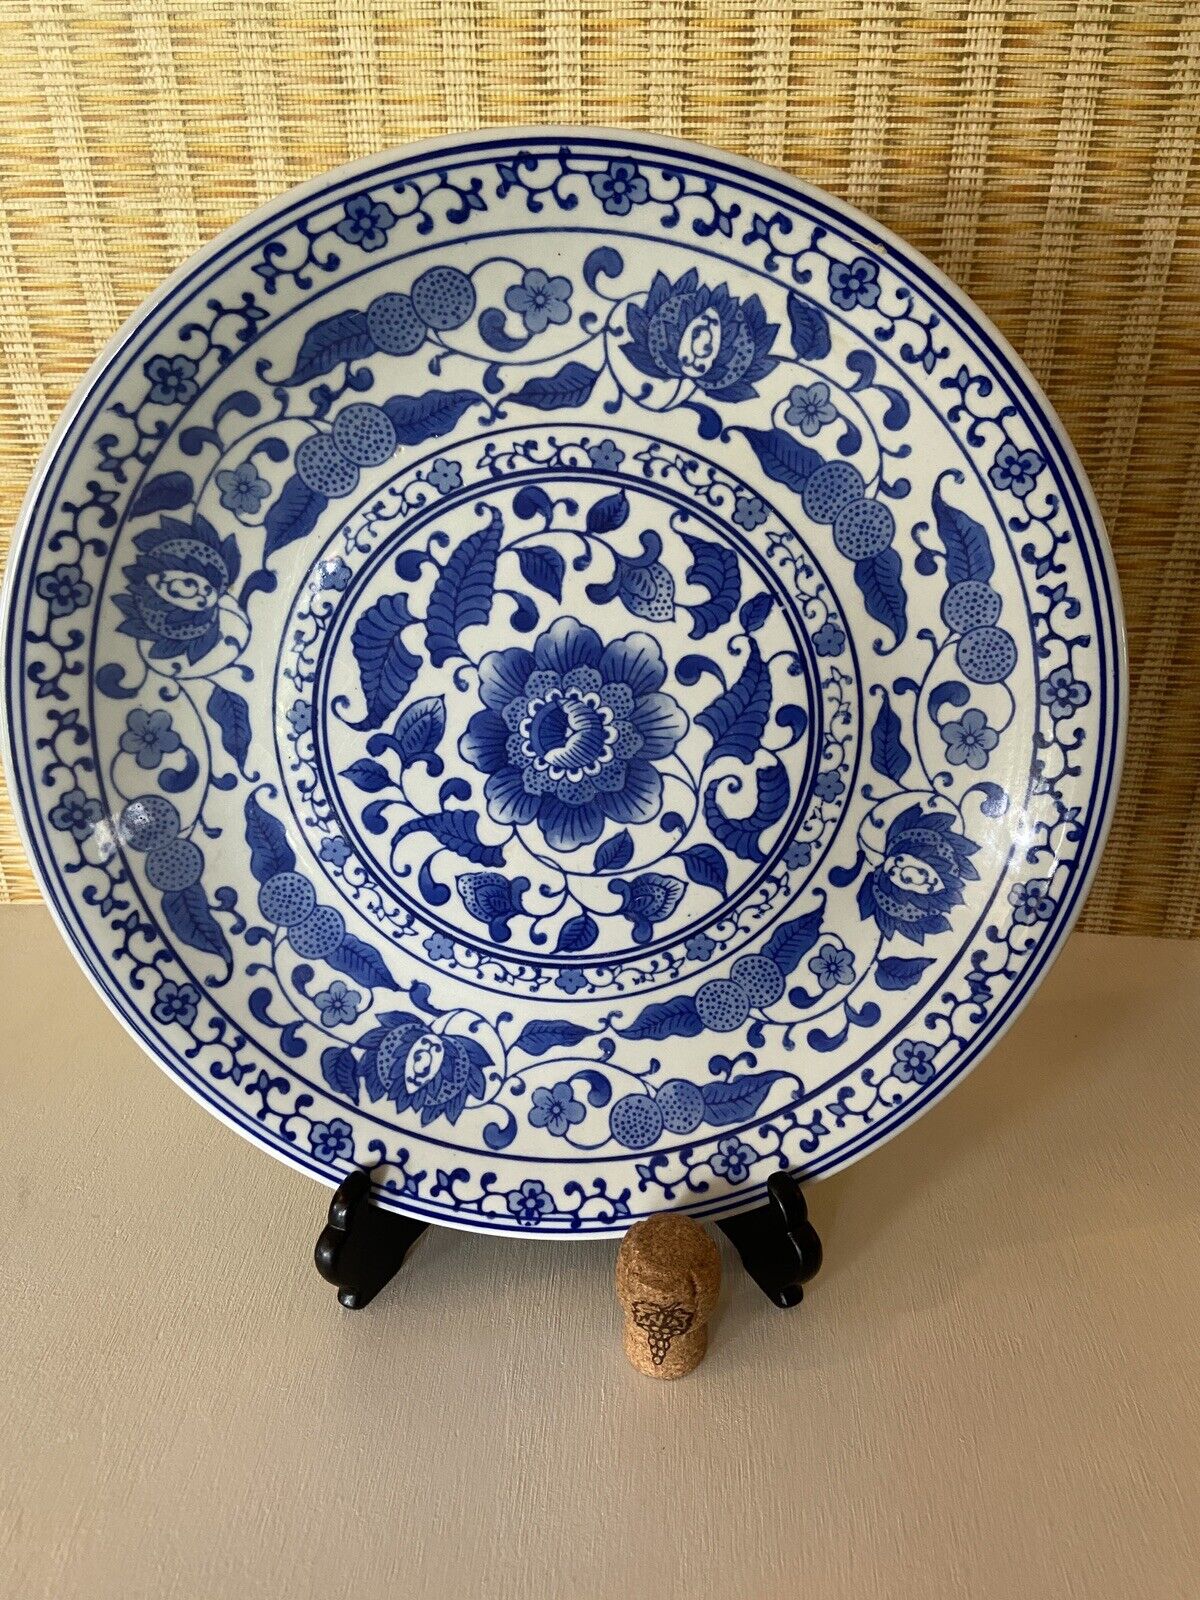 Chinese Export Ceramic Charger Plate Large 12” Blue & white Chinese Charger